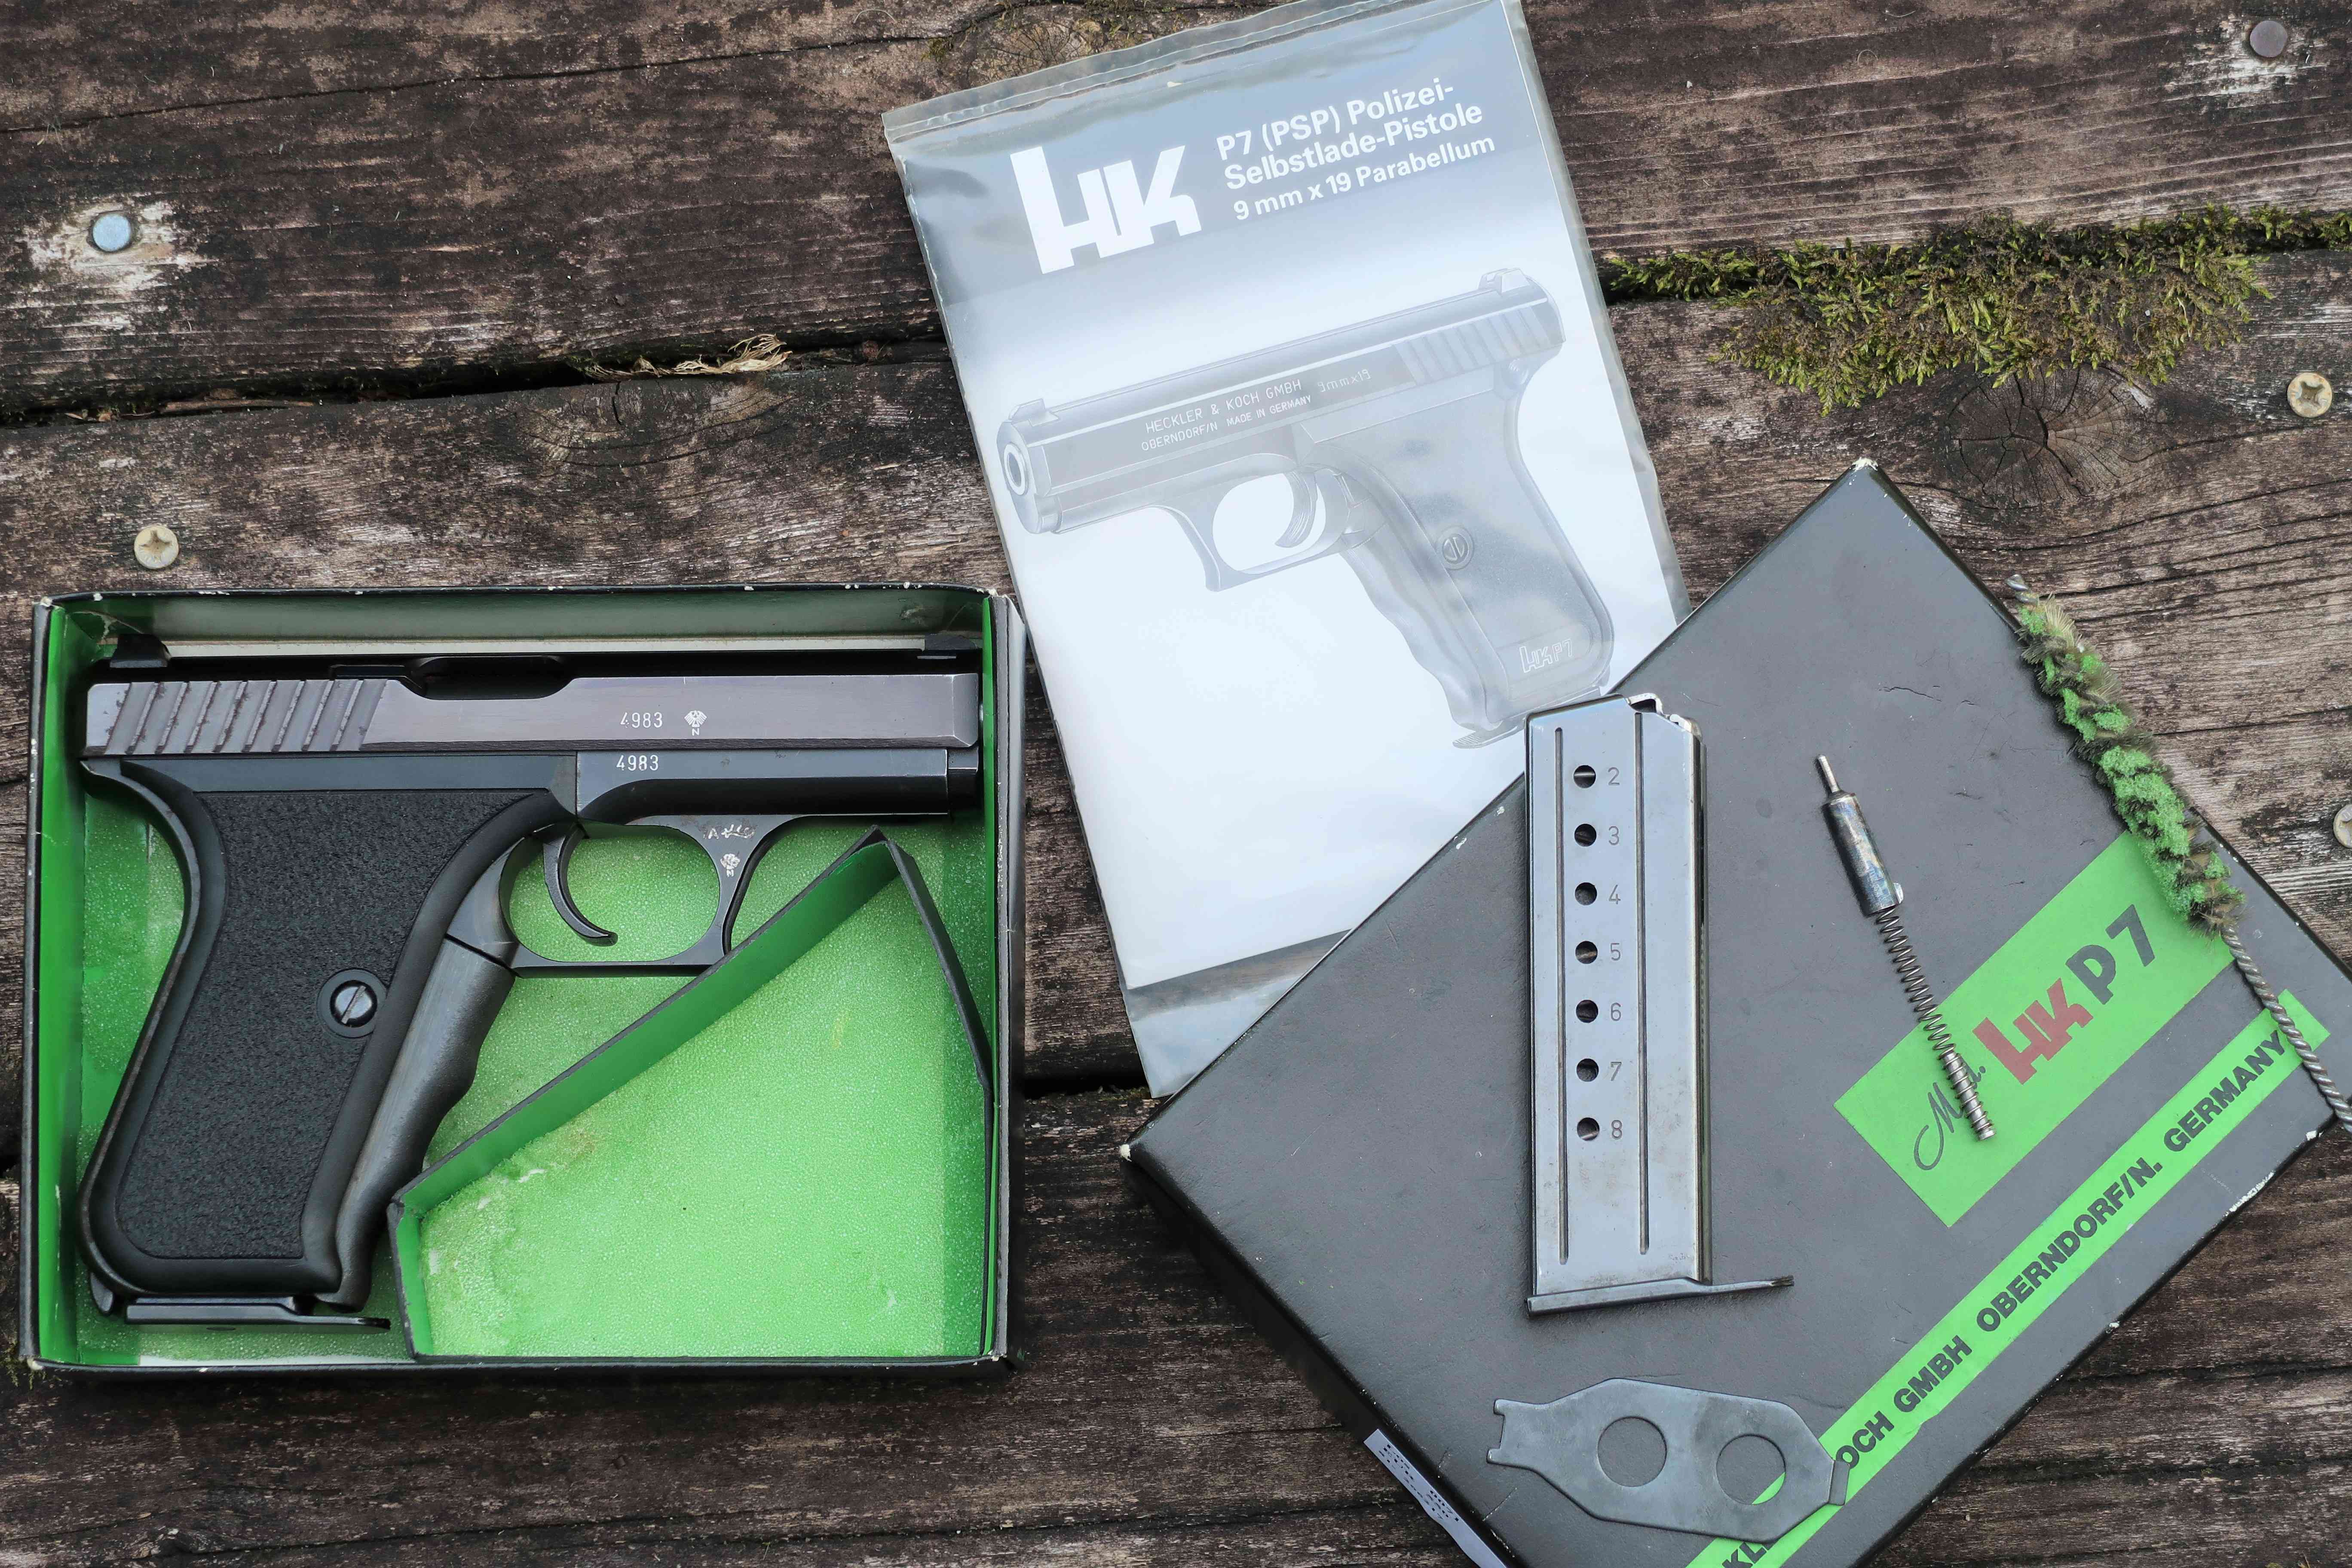 Fra Anvendelig kompromis H&K P7, Early Commercial Production, Boxed with Accessories, 4983, I-696 -  Historic Investments